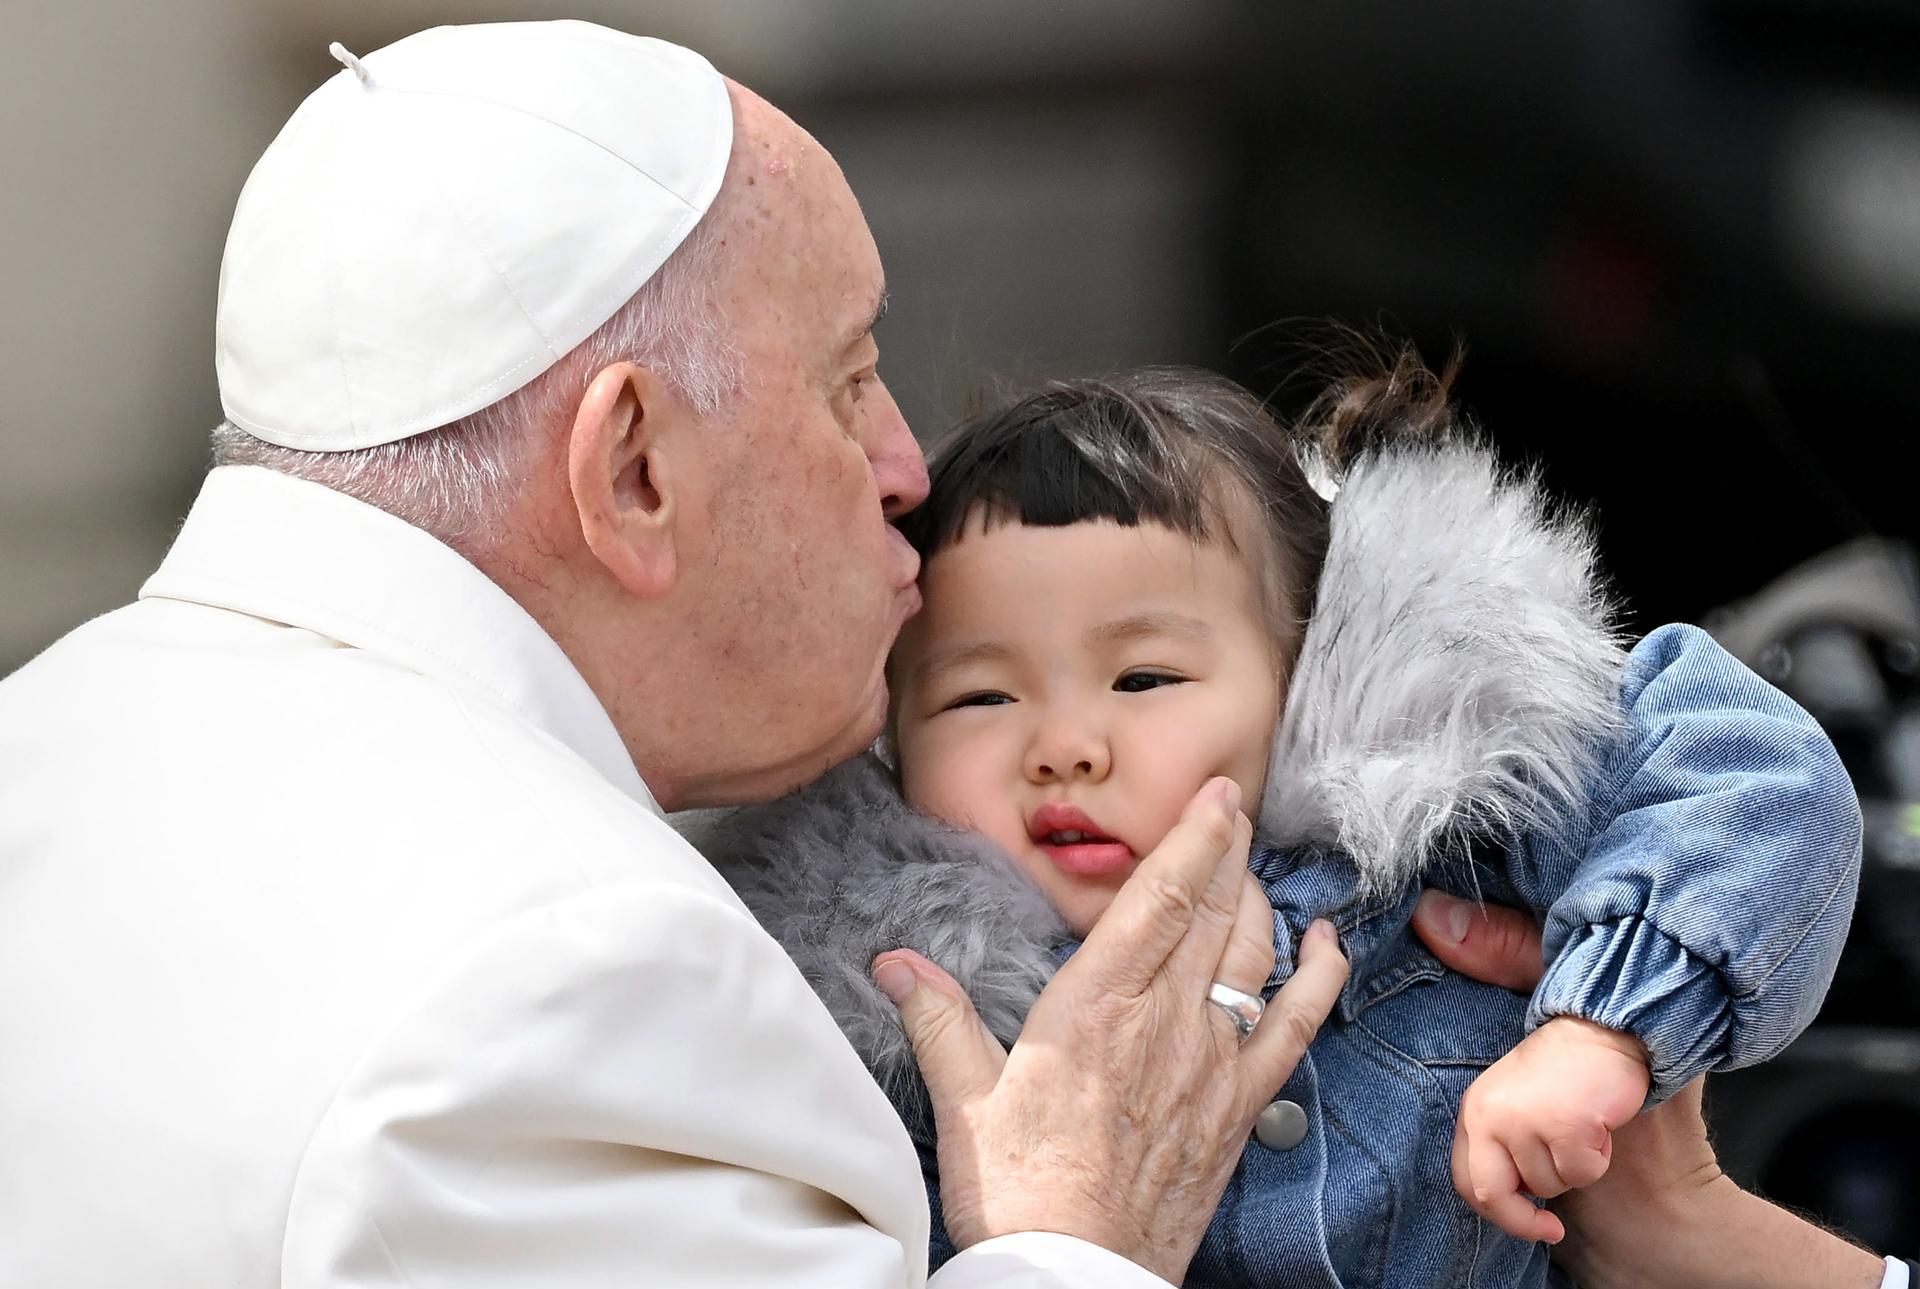 Pope Francis kisses a boy at the end of his weekly general audience in St. Peter's Square in Vatican City on 29 March 2023. EFE/ETTORE FERRARI